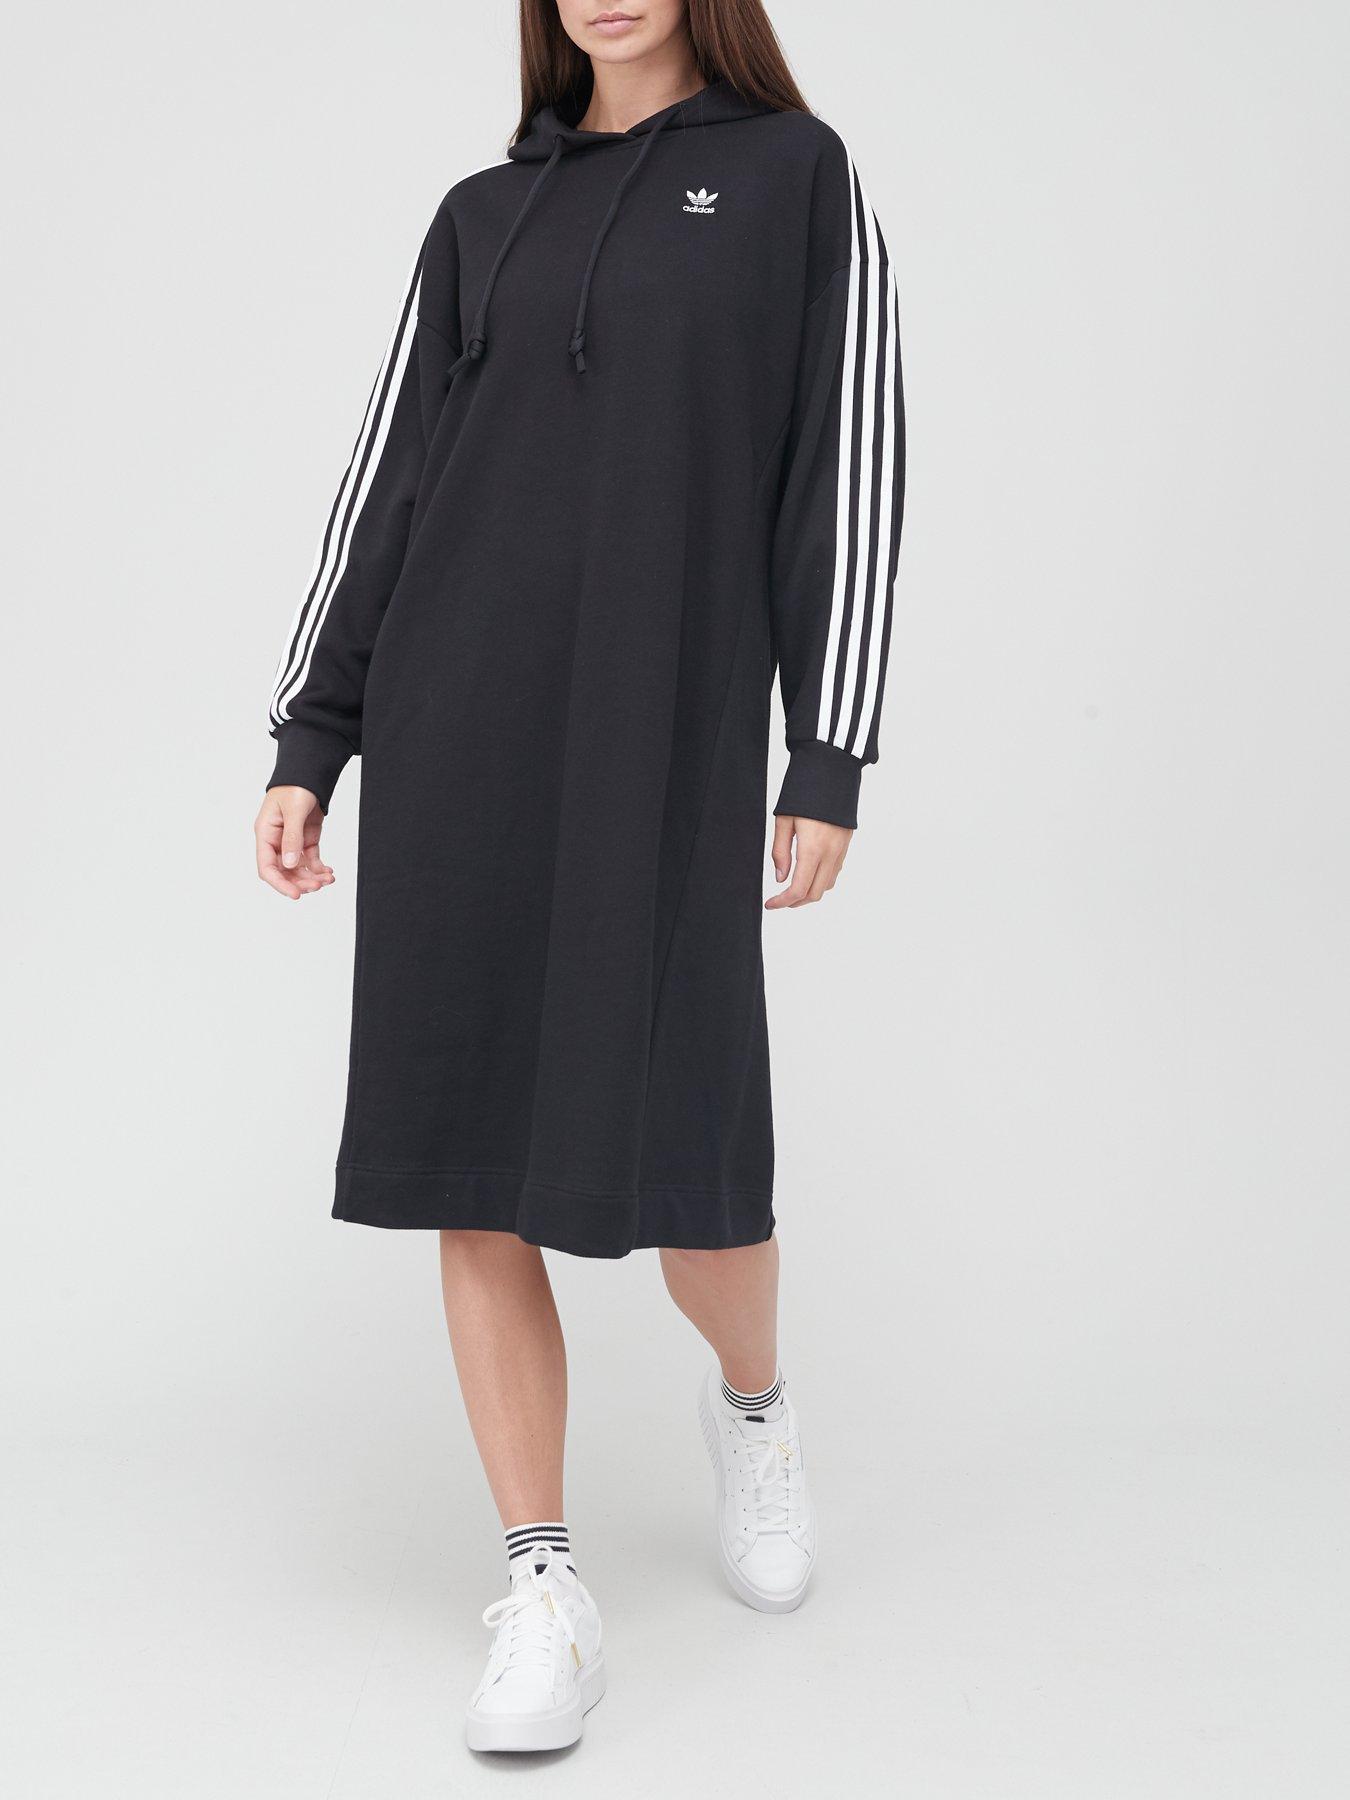 adidas hoodie outfits